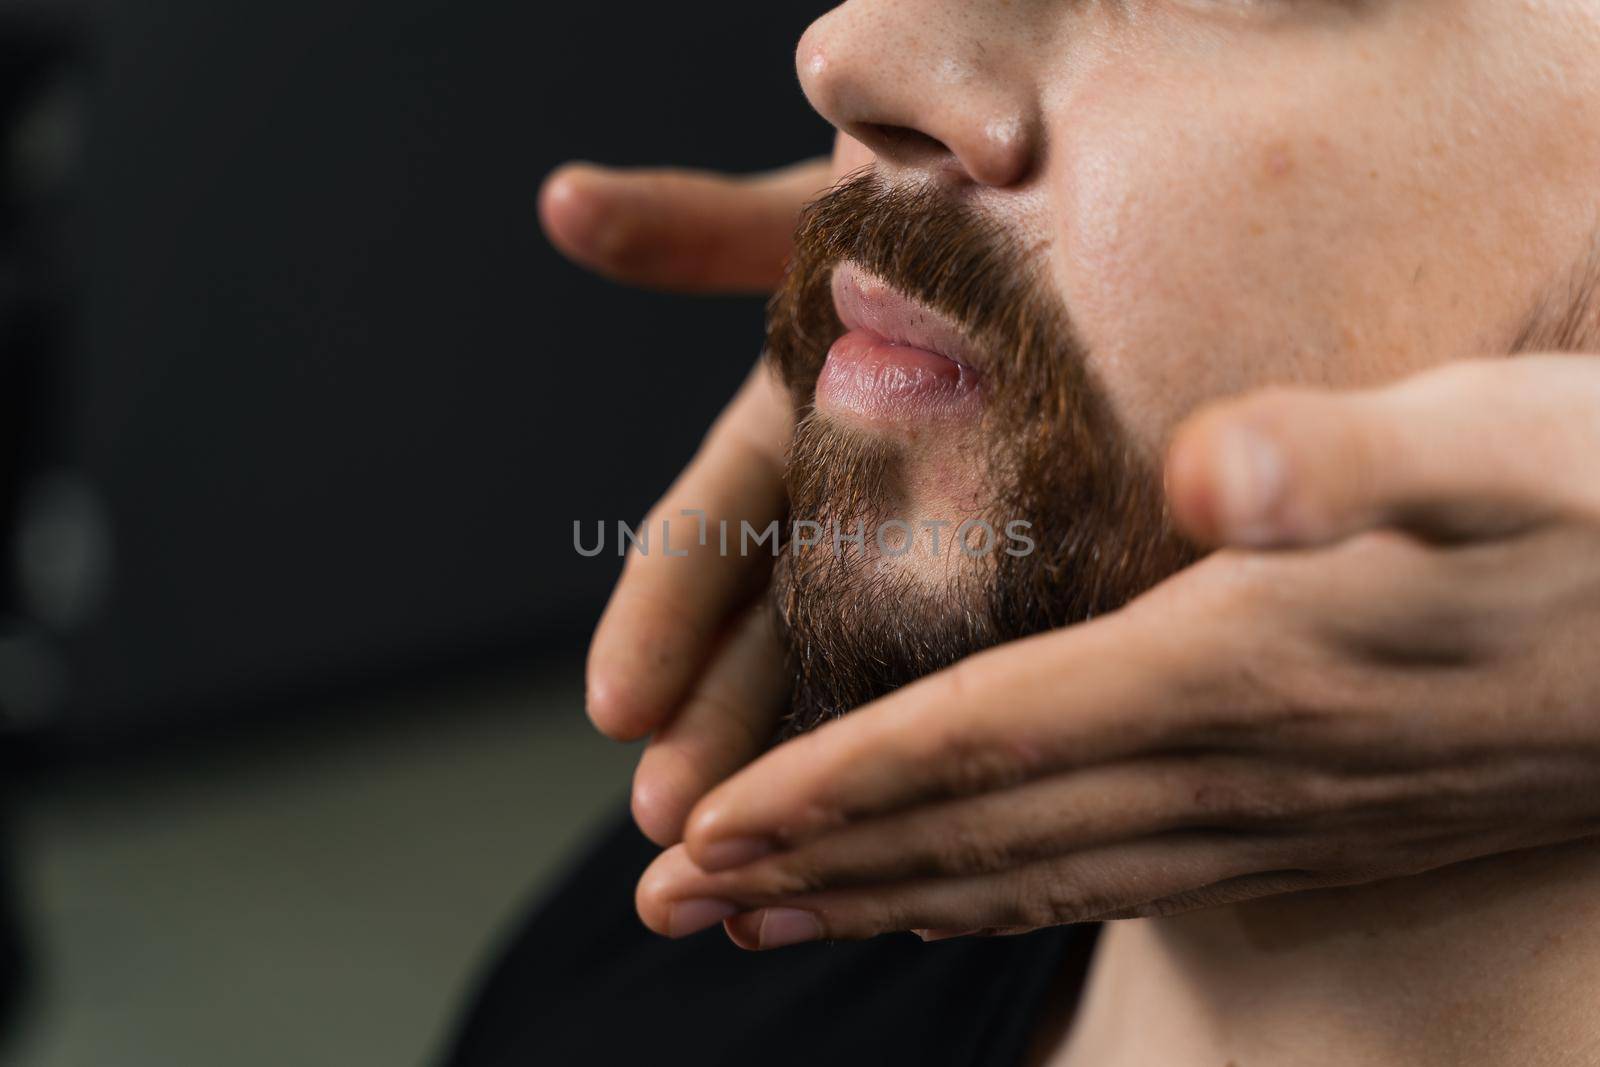 Fixing the shape of the beard with wax. The result of a haircut in a barbershop